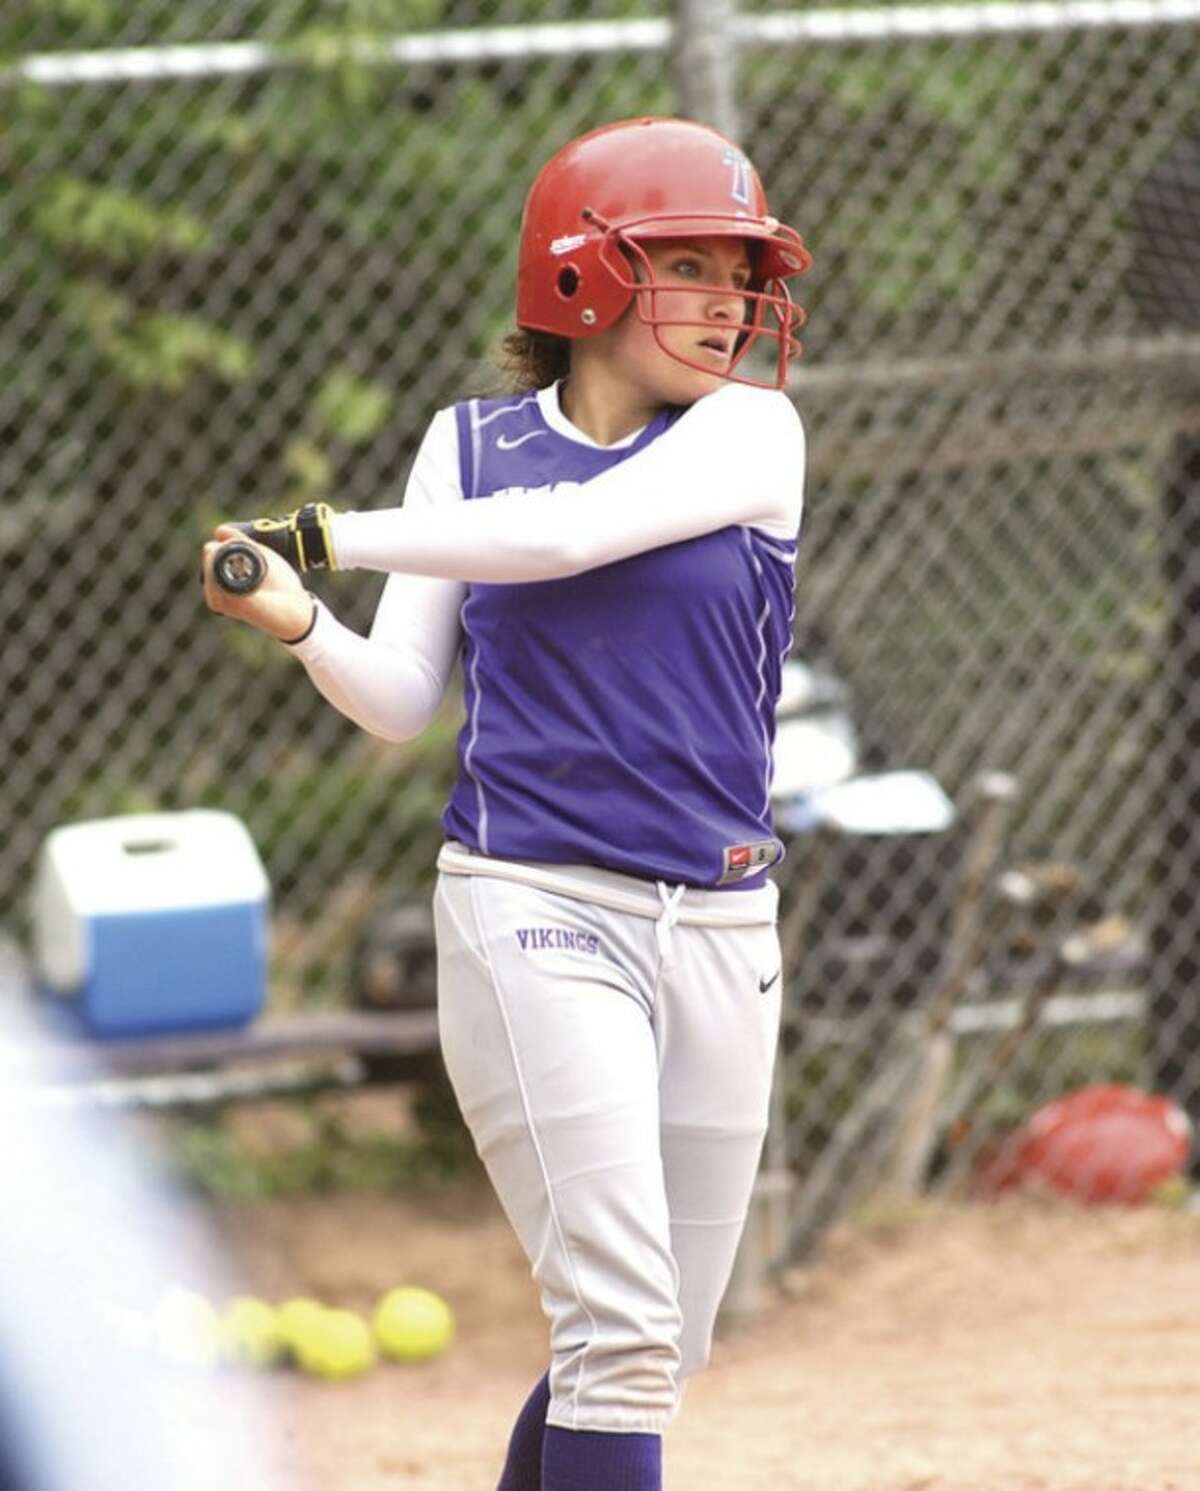 Photo by John Nash Westhill senior Allie Souza takes a cut in the on-deck circle during one of the Vikings' recent games. Souza is the 2012 winner of the Allyson Rioux Scholarship -- an award that was even more special to her because she was named after the late Westhill three-sport standout.